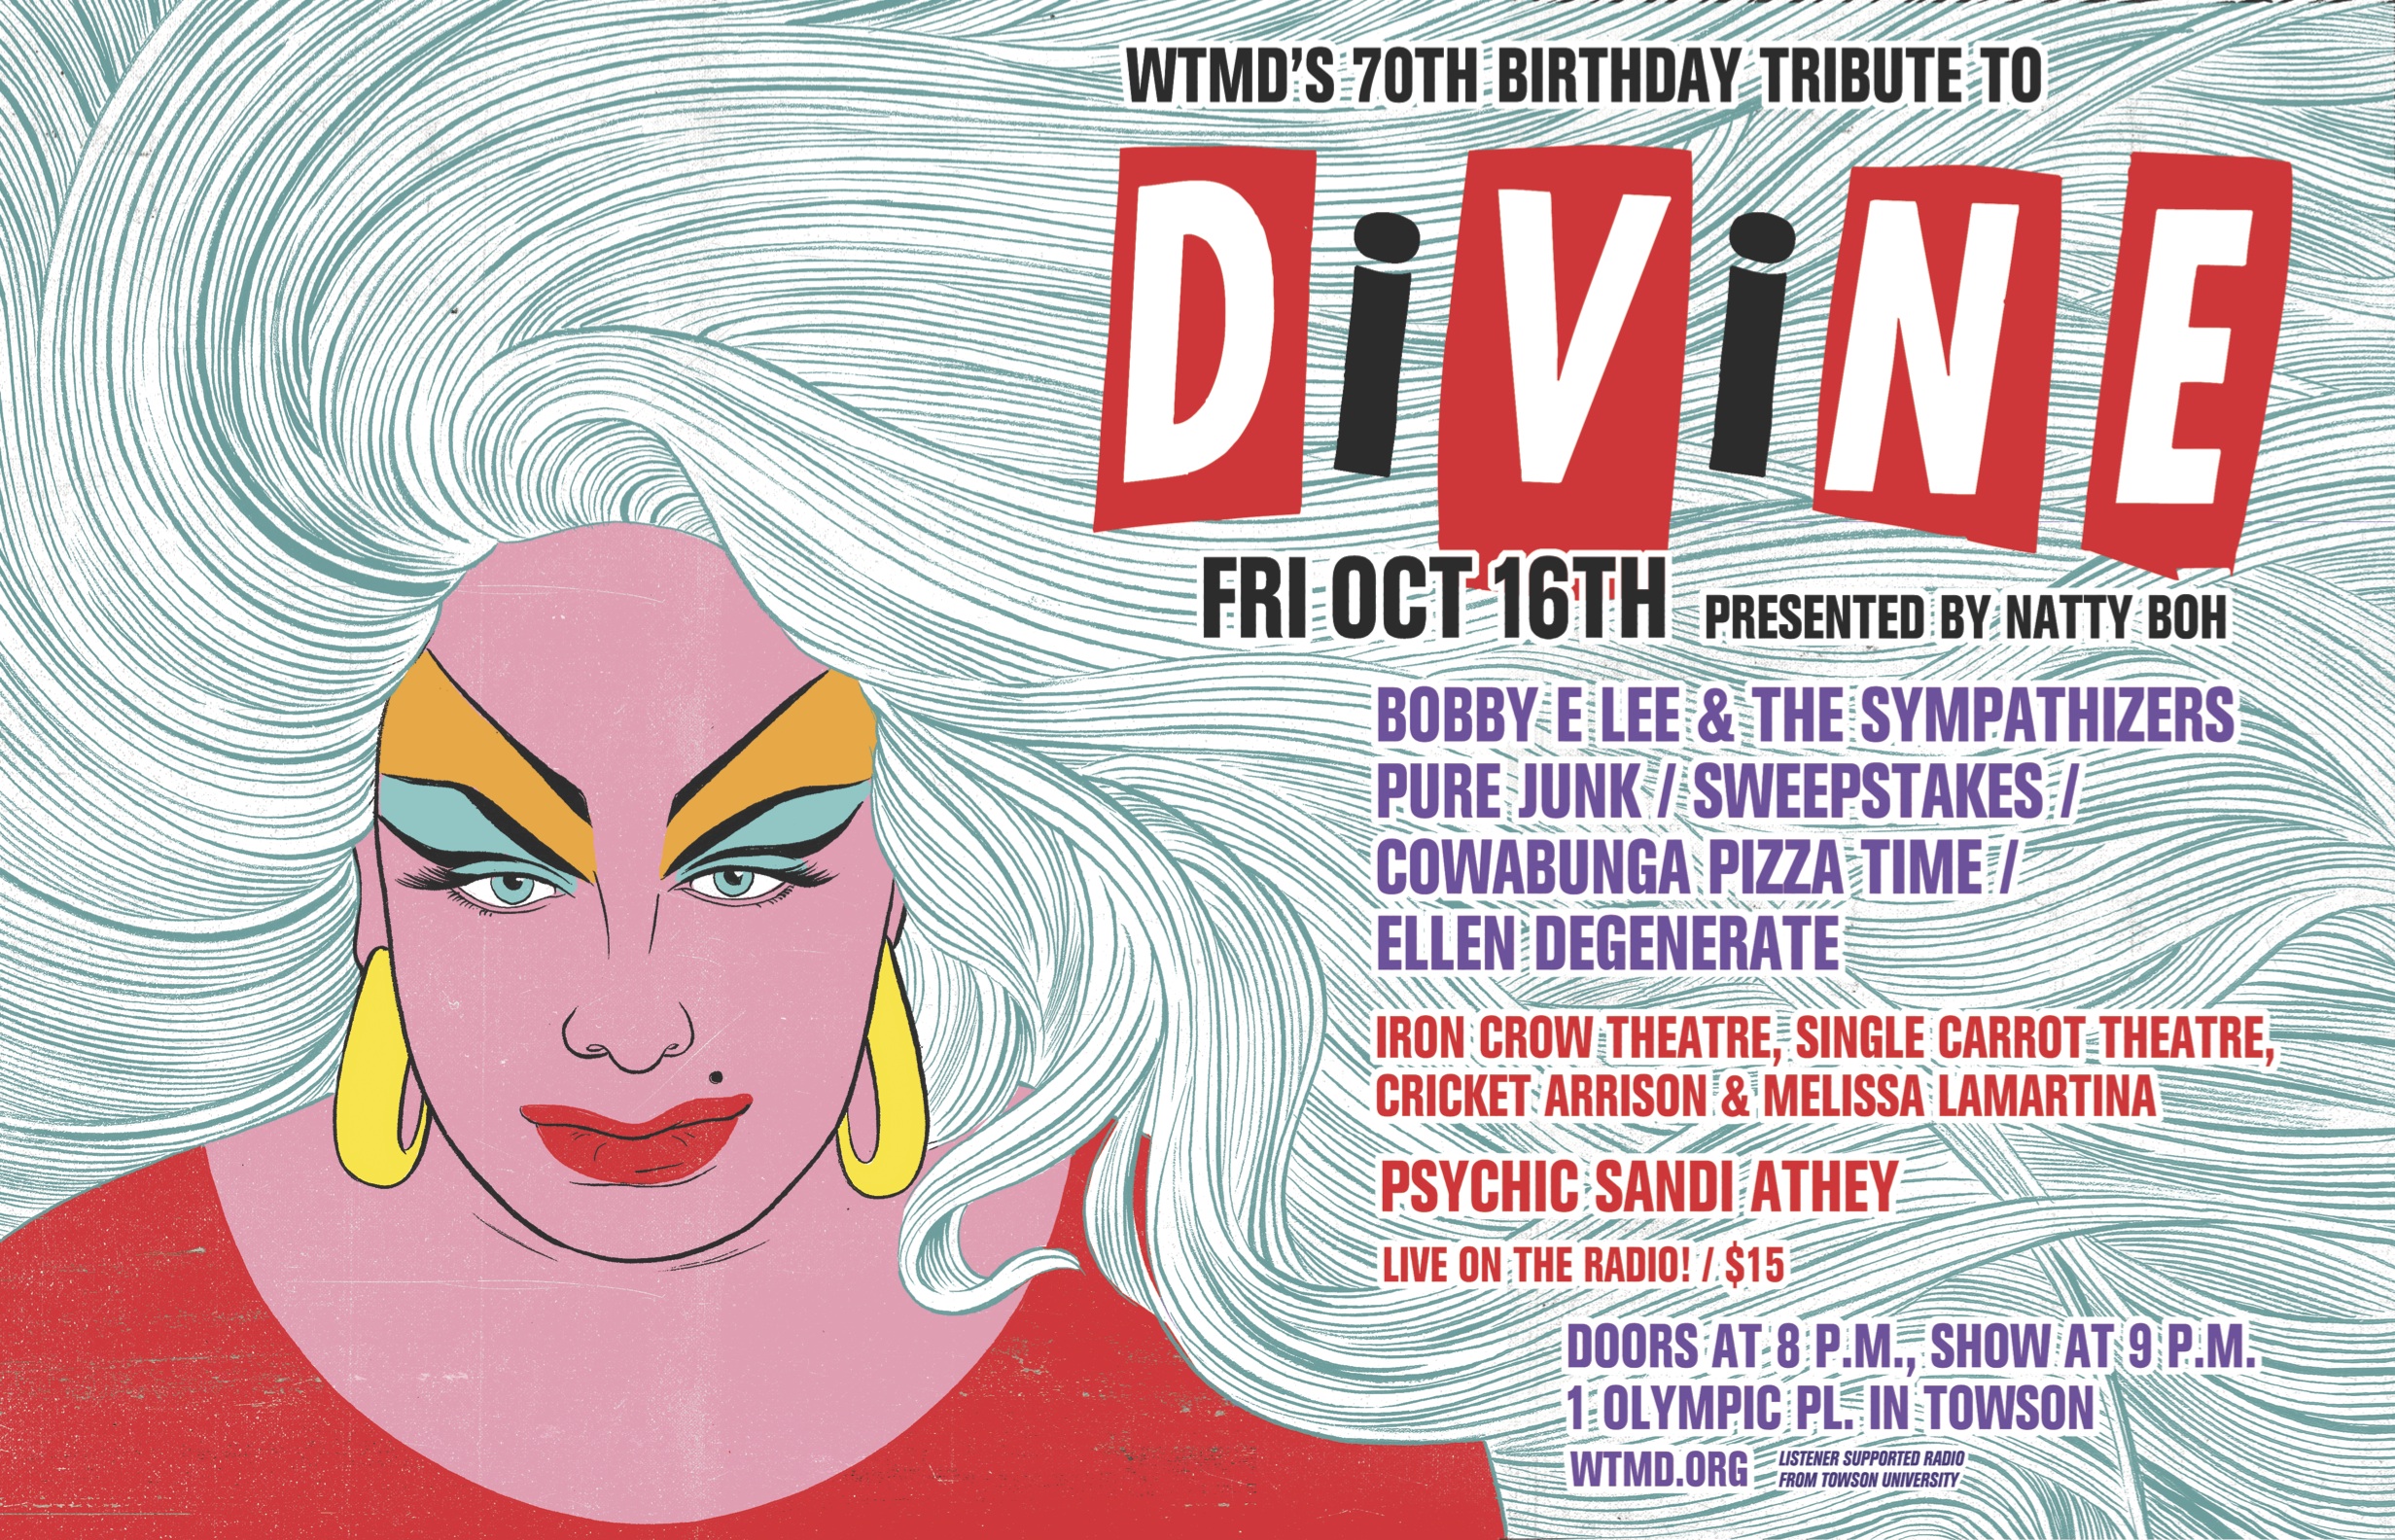 WTMD's birthday tribute to Divine is Friday Oct. 16. Tickets: http://wtmd.missiontix.com/portal/50 Poster by Alex Fine